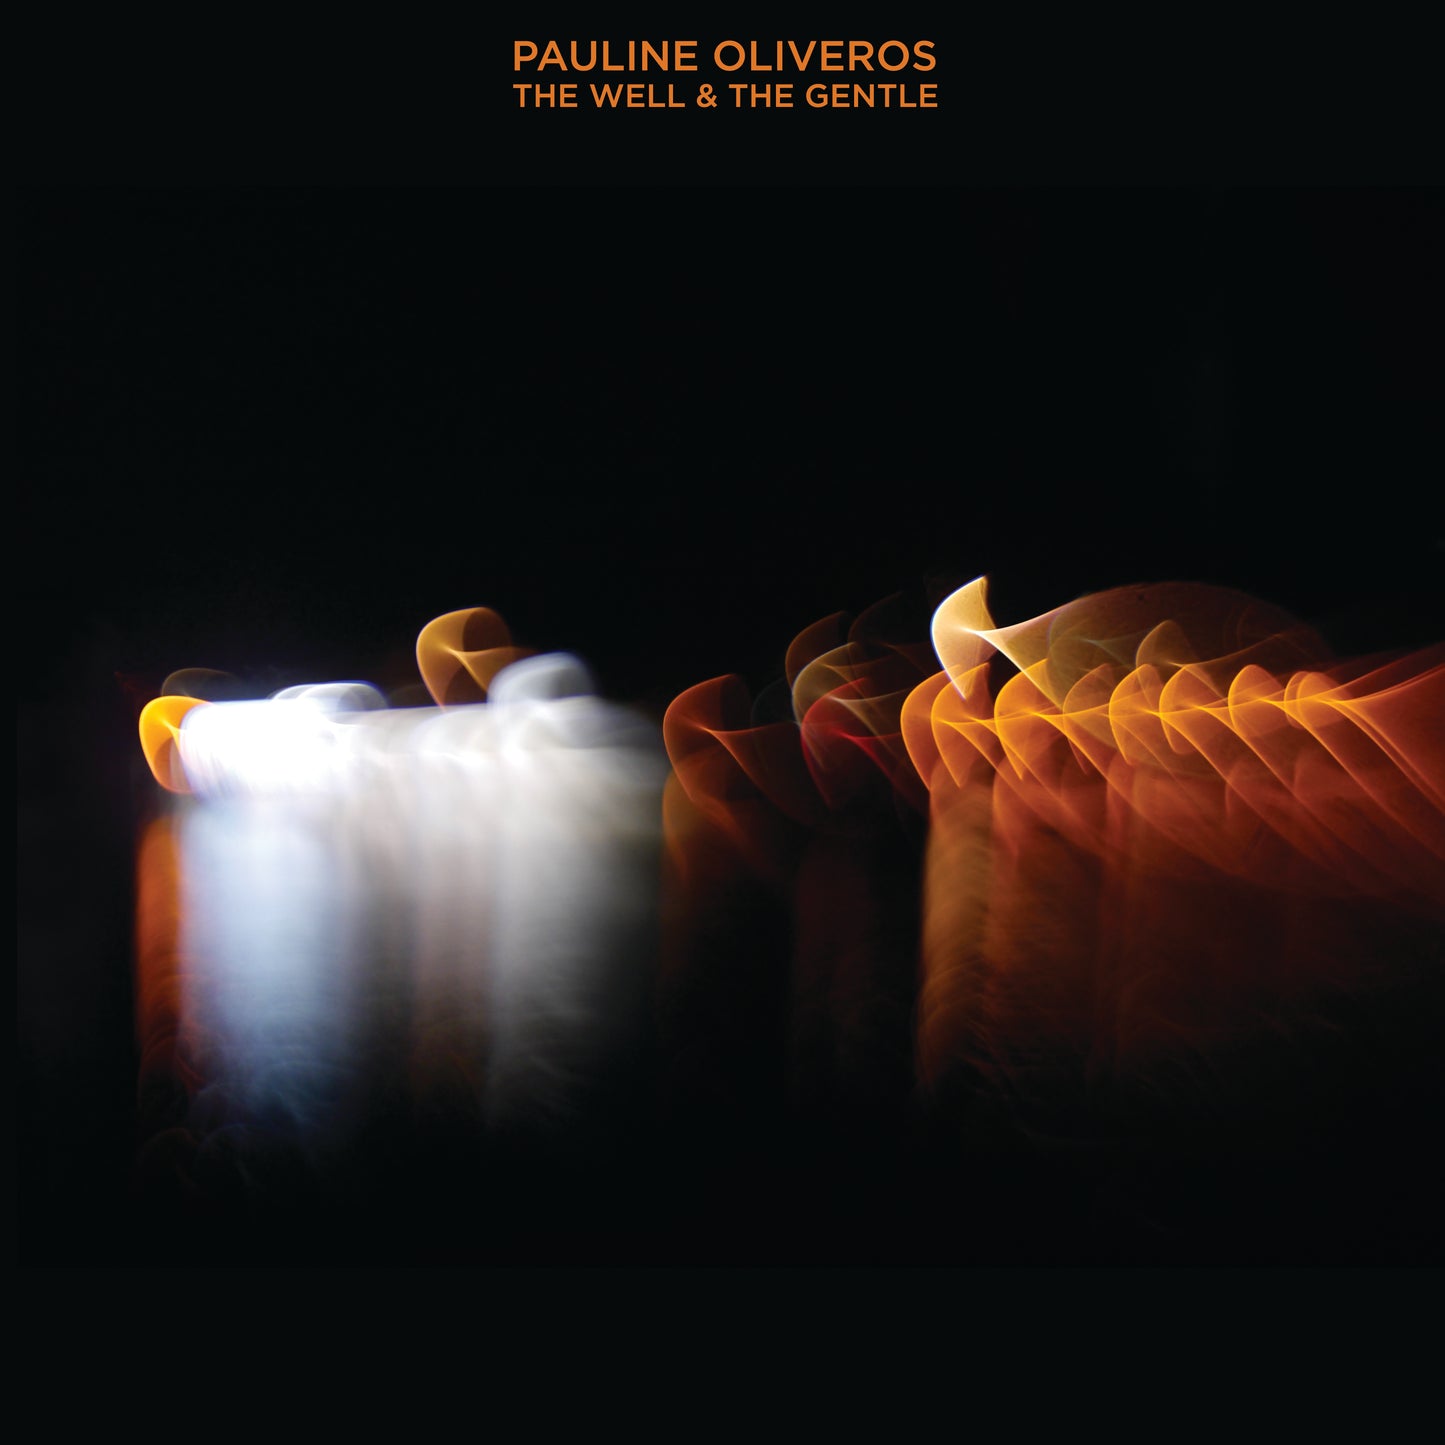 Pauline Oliveros The Well & The Gentle - 2LP